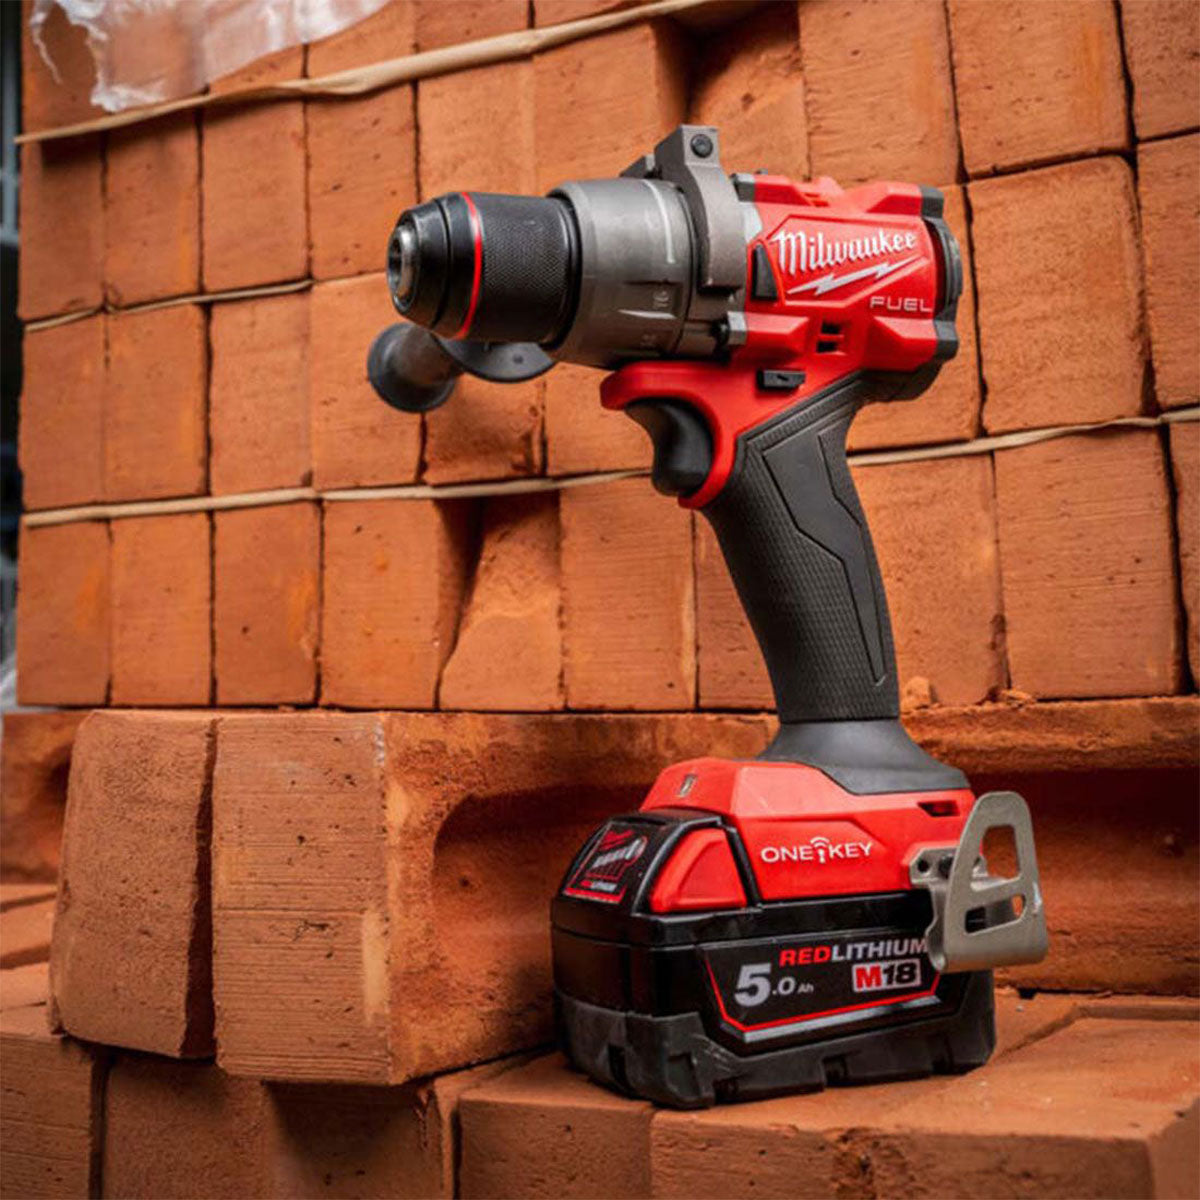 Milwaukee M18ONEPP2A3-502X 18V Fuel Brushless Combi Drill & Impact Driver with 2 x 5.0Ah Batteries Charger & Case 4933493245